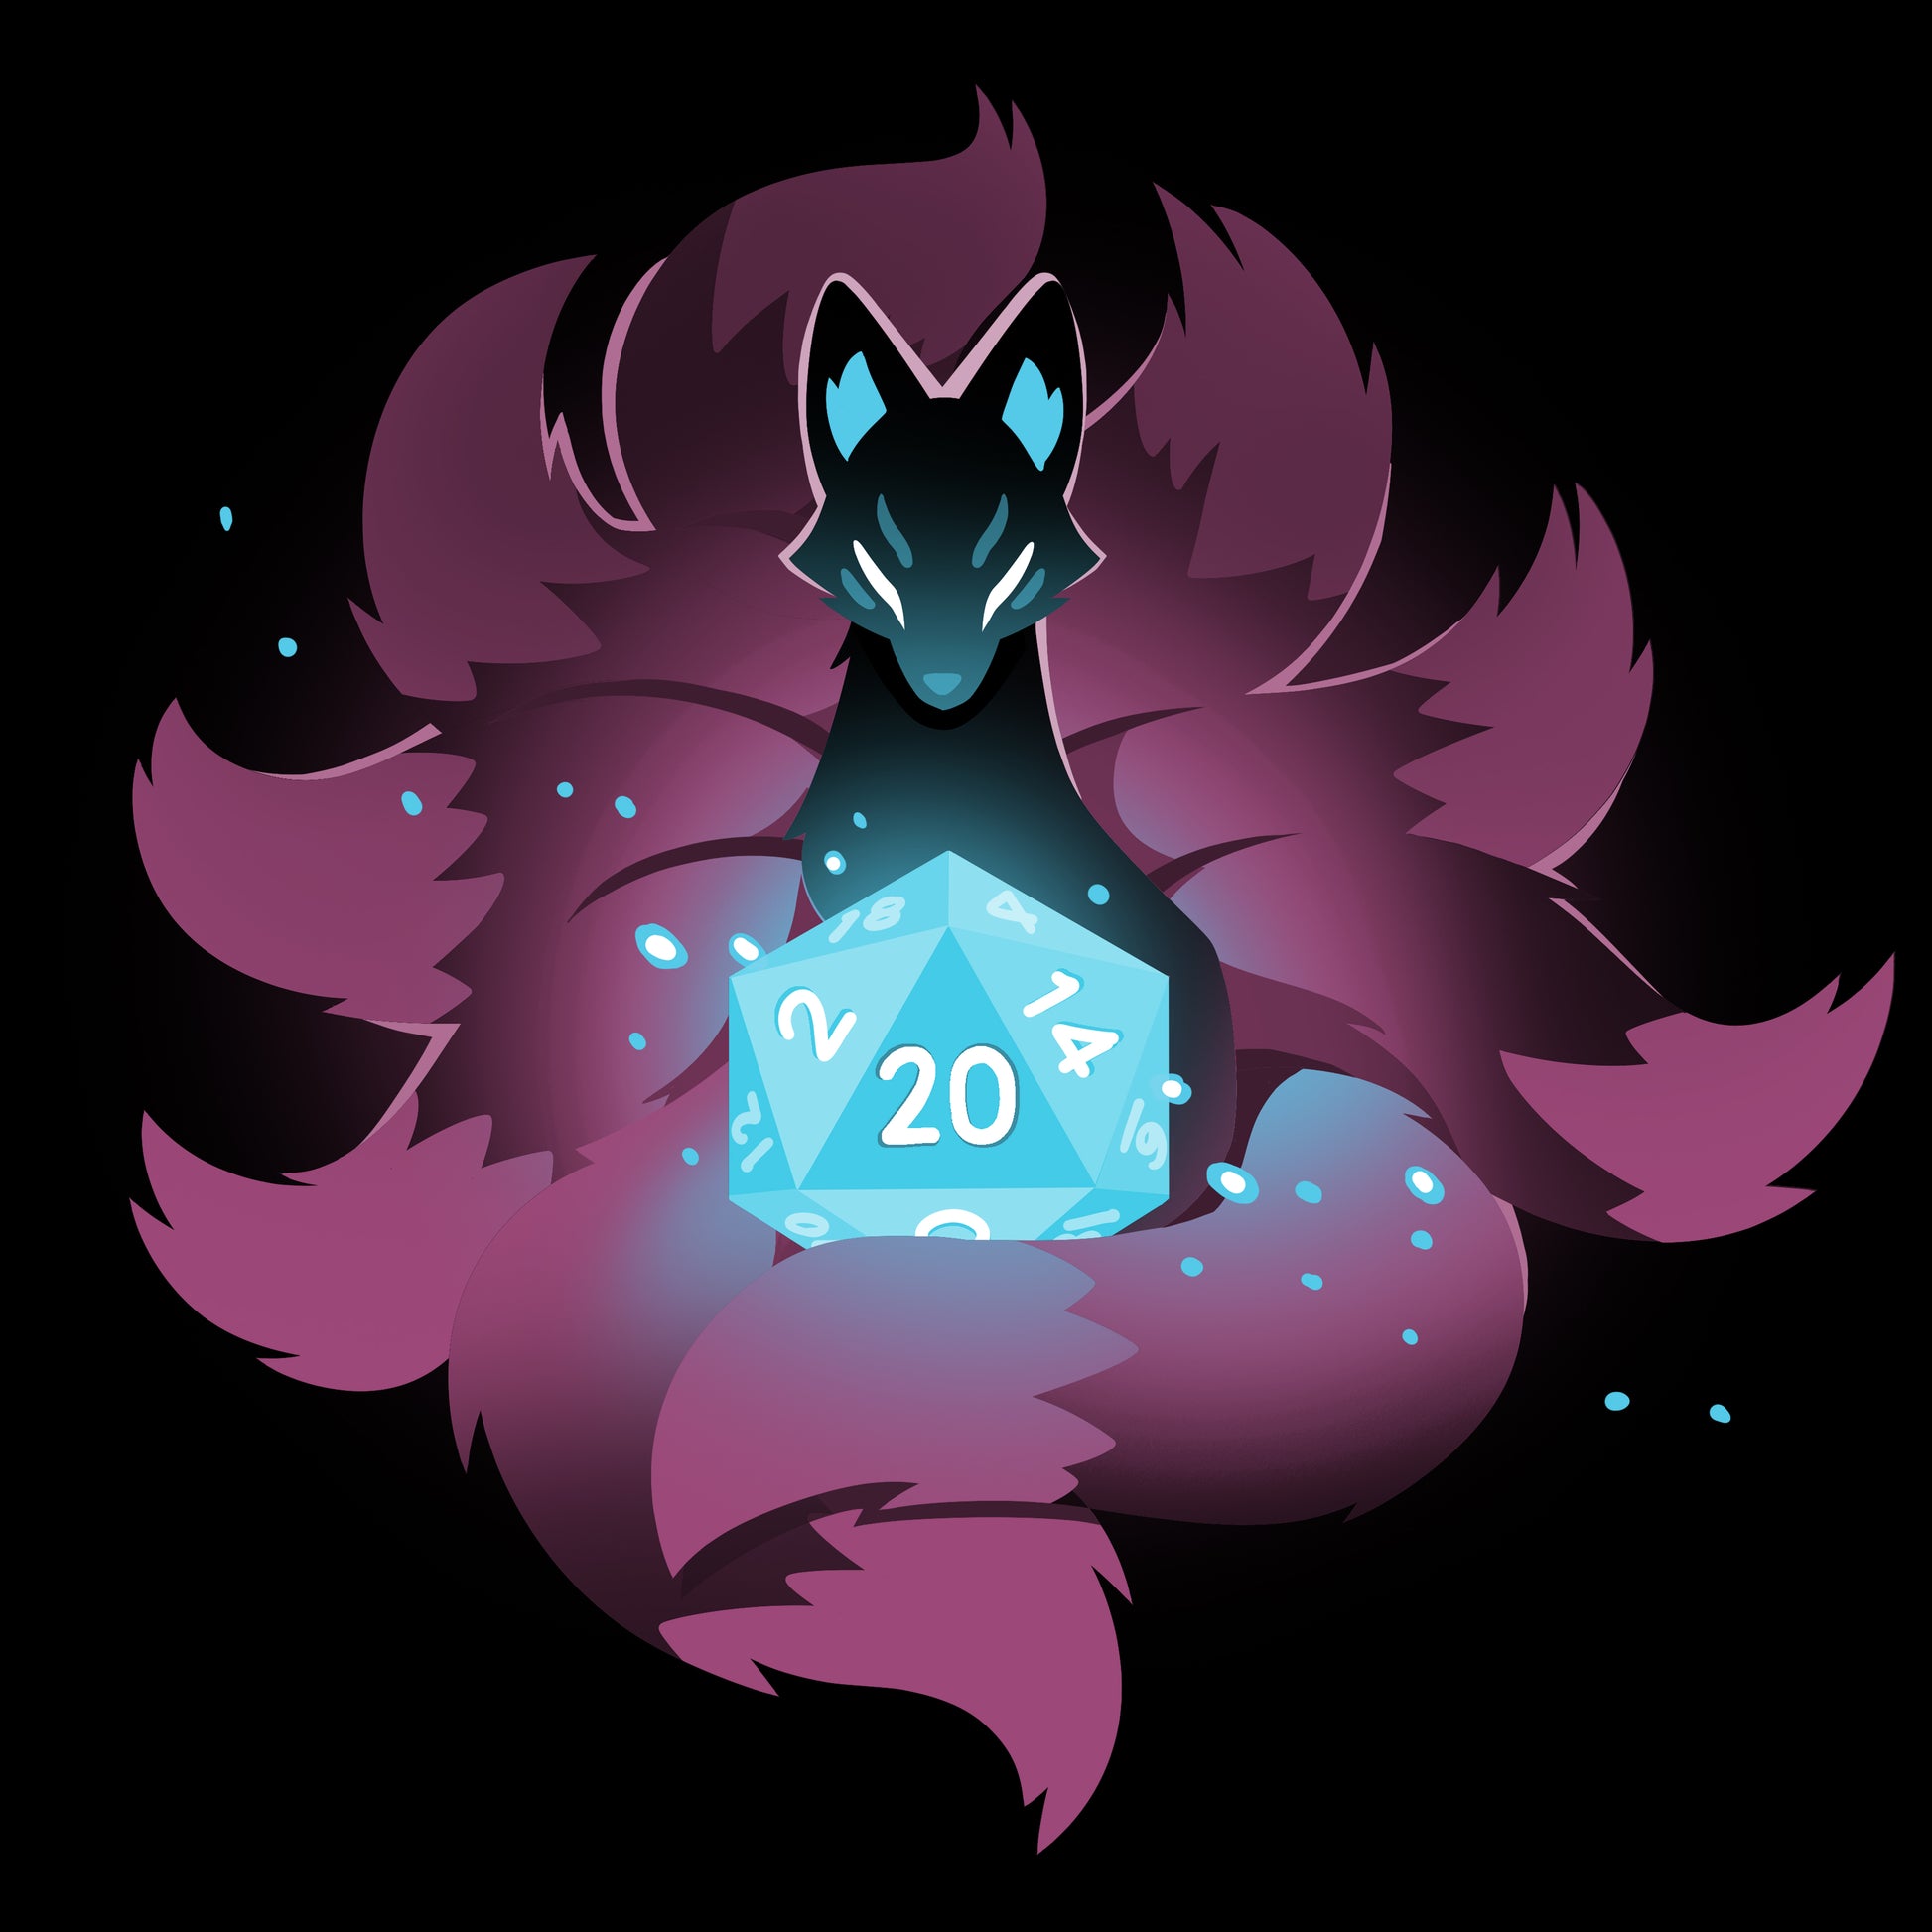 An image of a TeeTurtle D20 Kitsune featuring a fox rolling a blue d20, representing rolling opportunities.